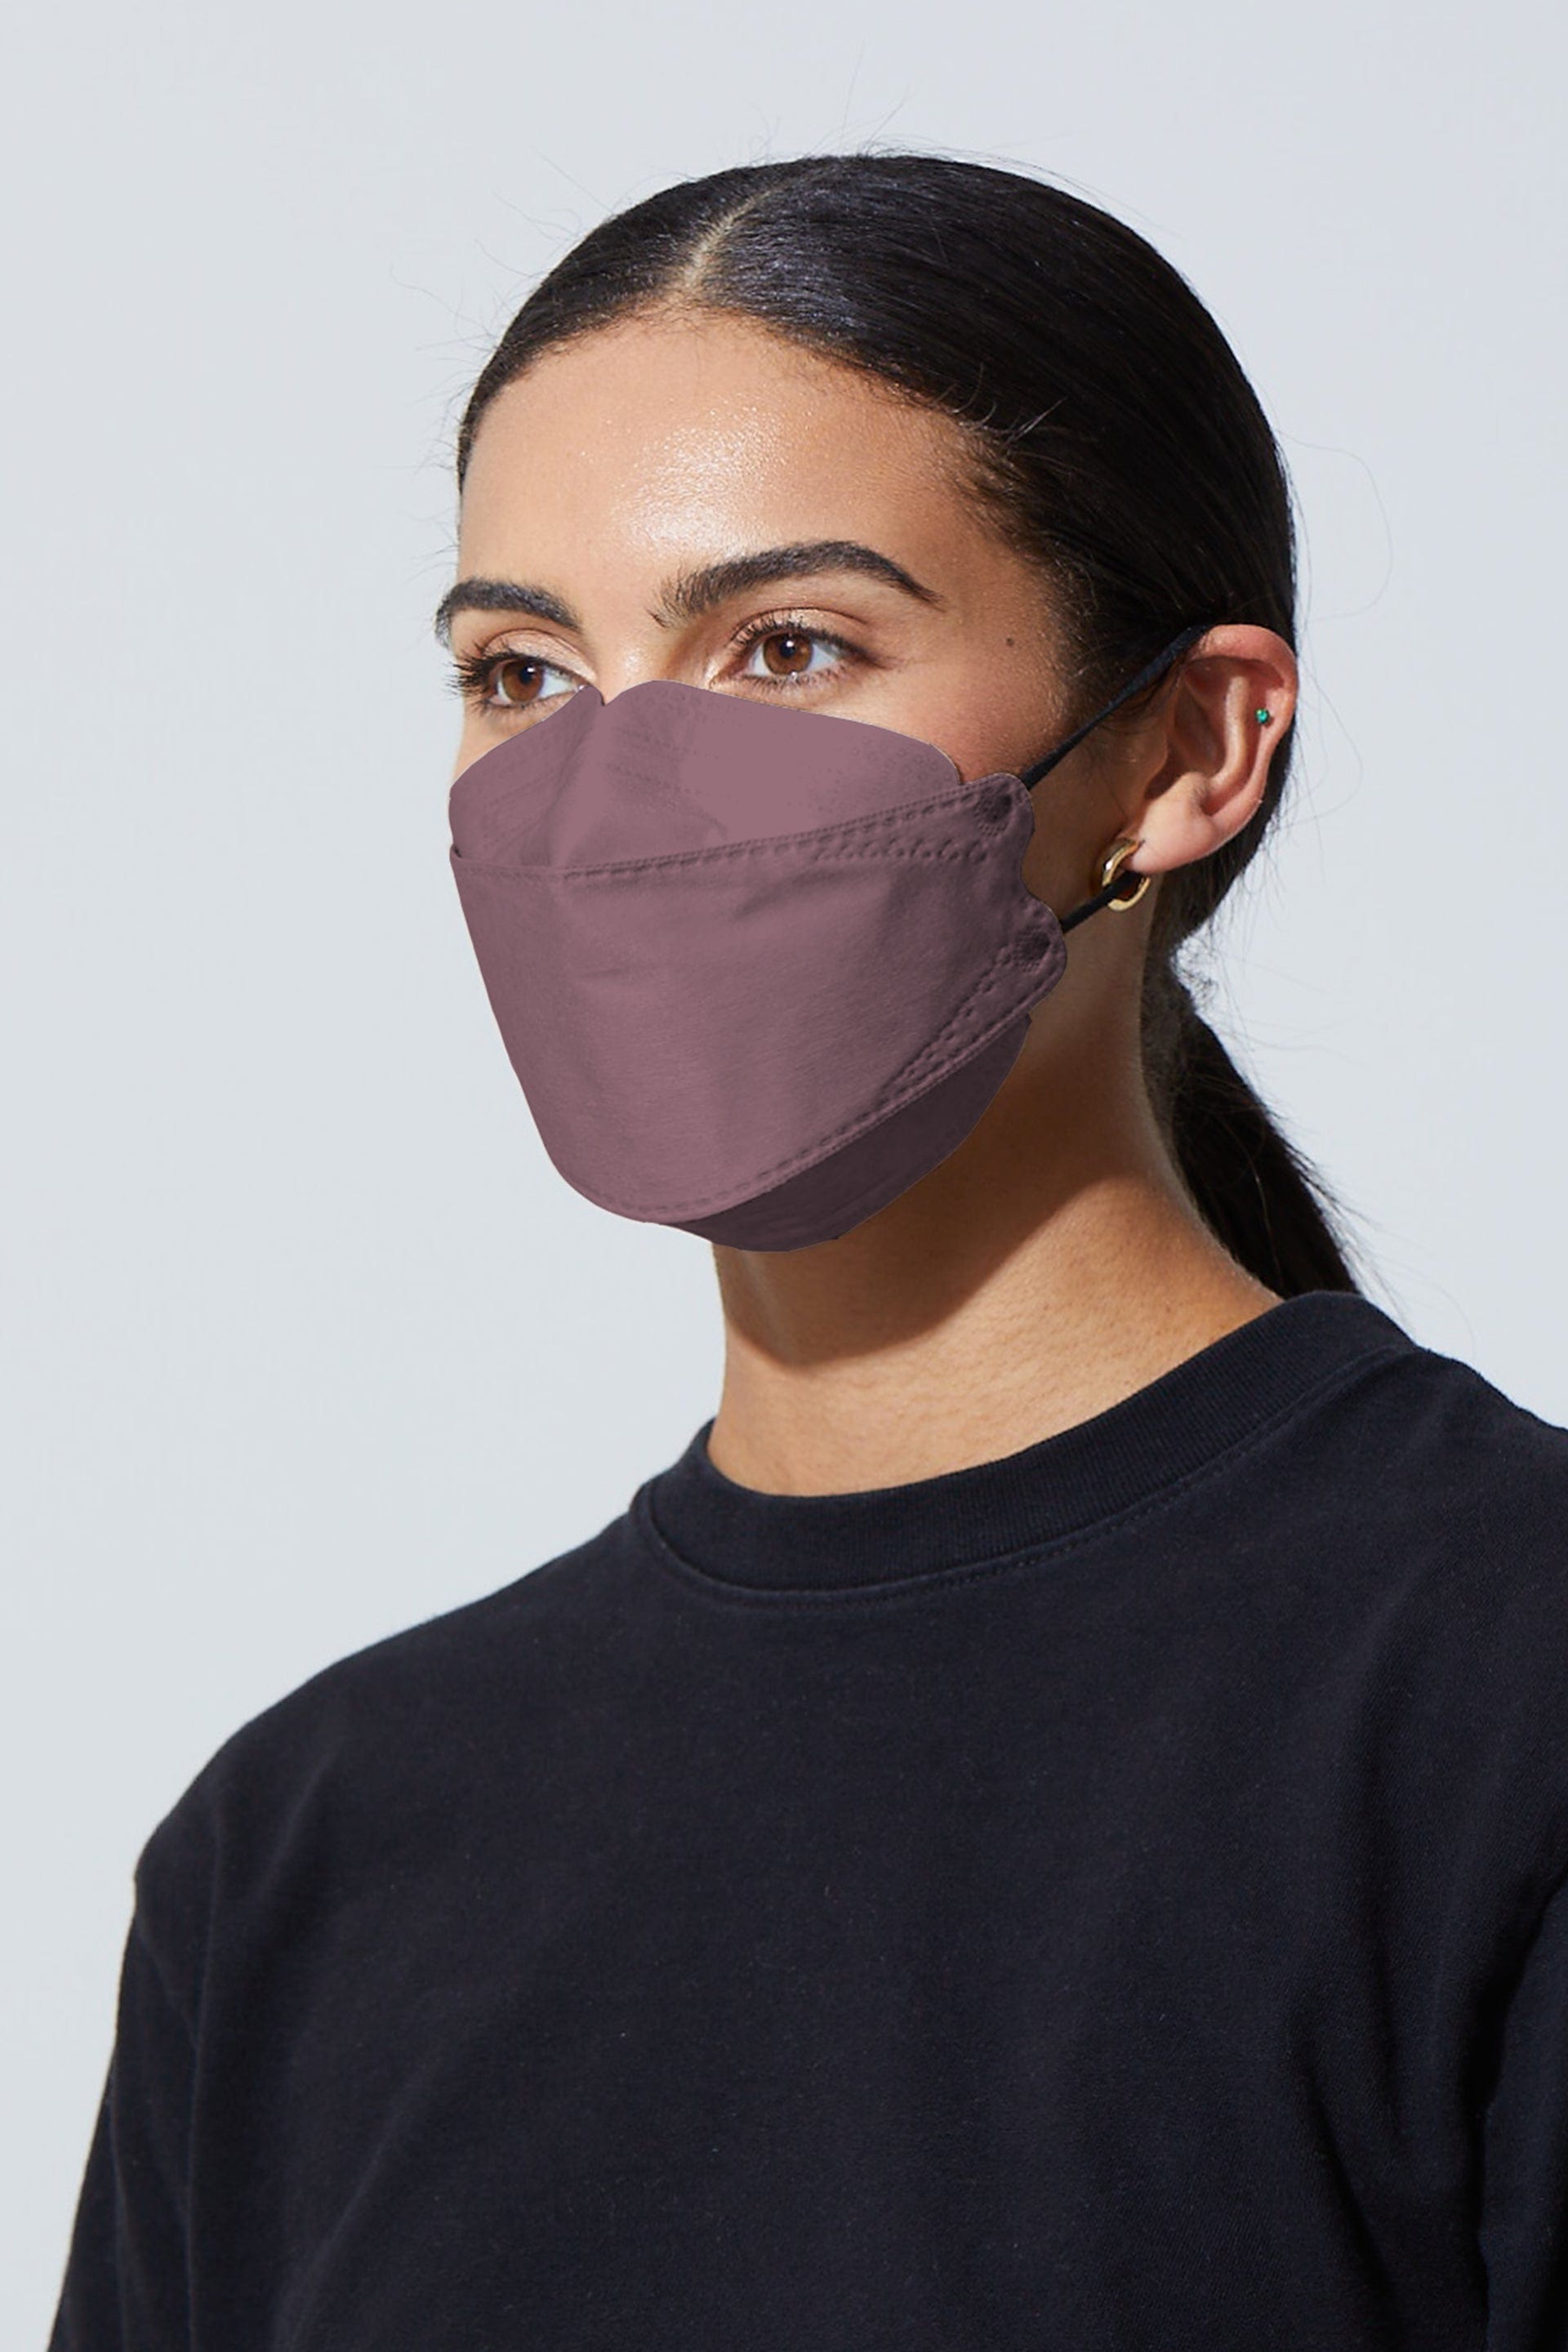 Woman wearing stylish Dark Purple KF94 face mask, with high quality breathable fabric. 